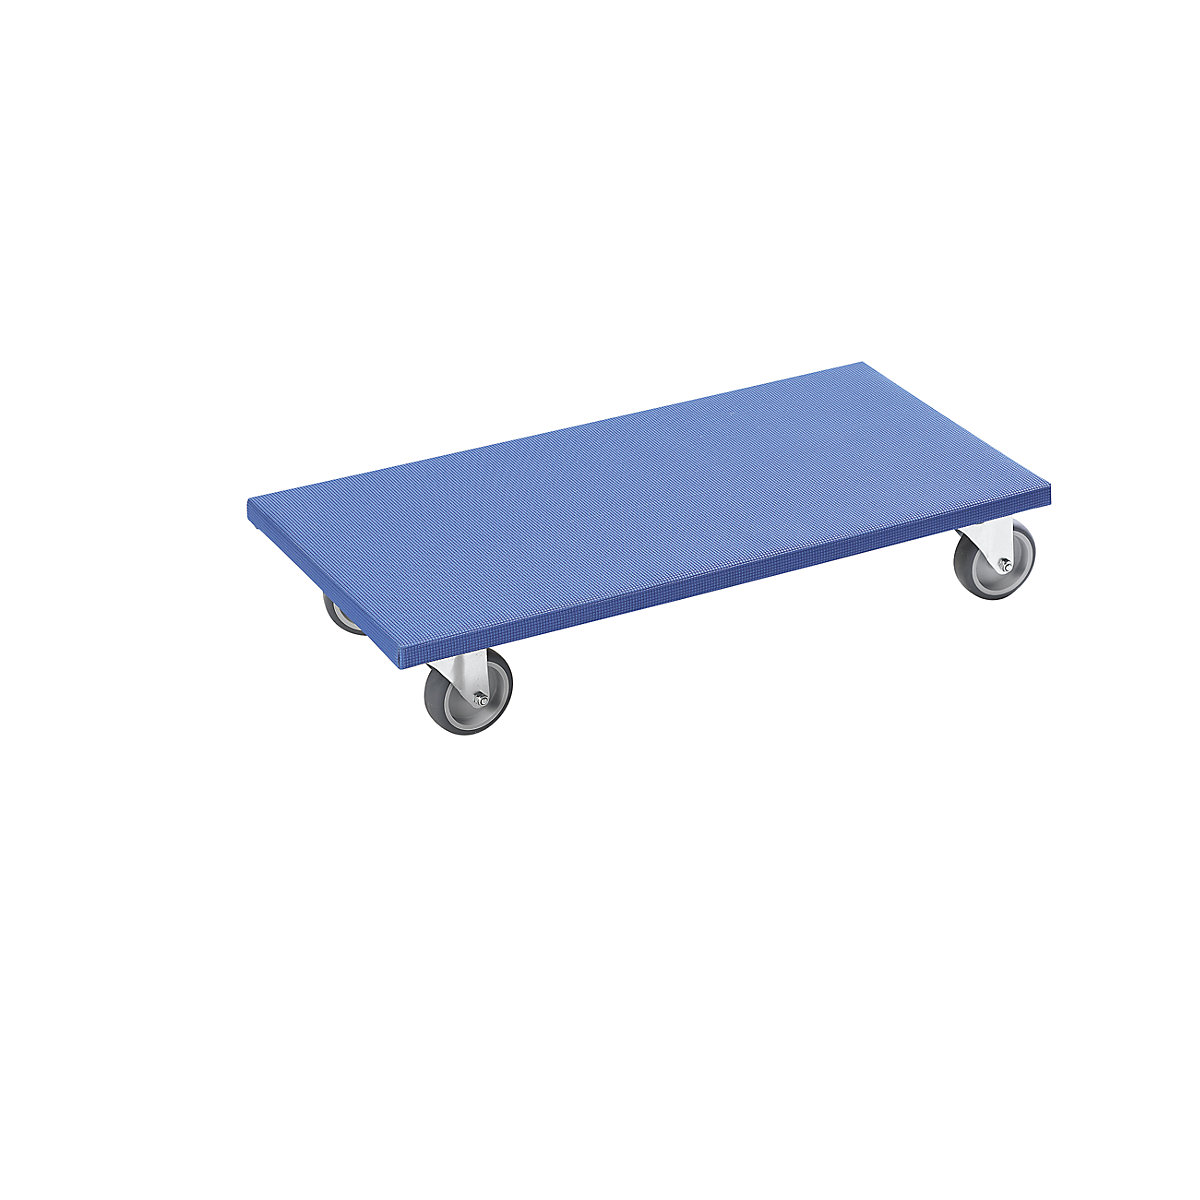 Furniture dolly, LxWxH 600 x 300 x 120 mm, pack of 2, 2+ packs-5